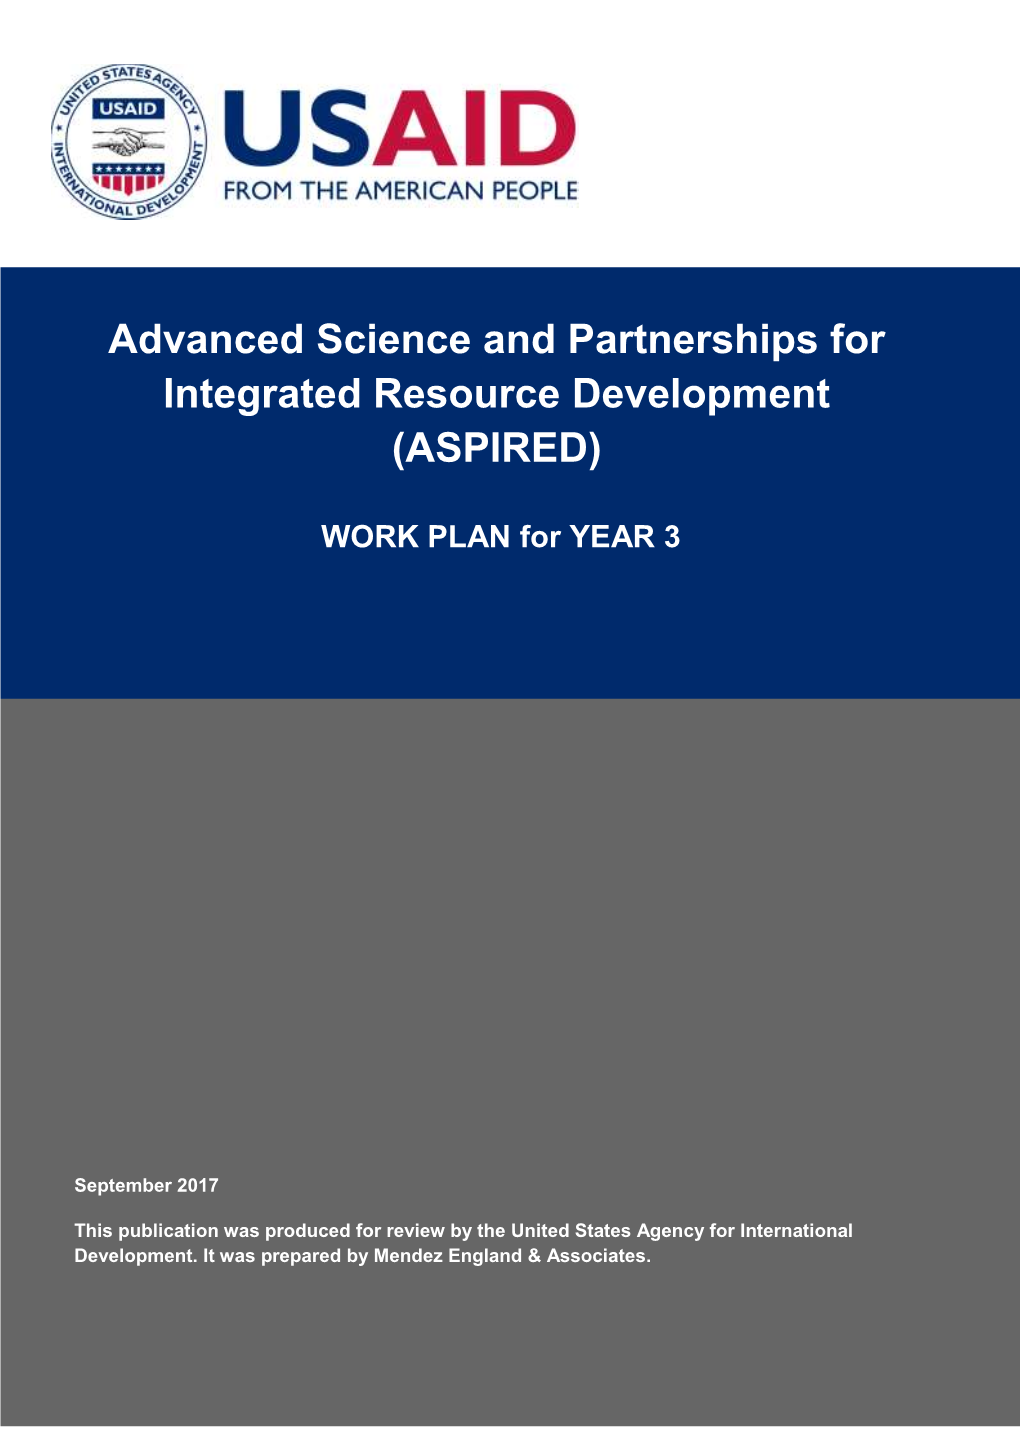 Advanced Science and Partnerships for Integrated Resource Development (ASPIRED)